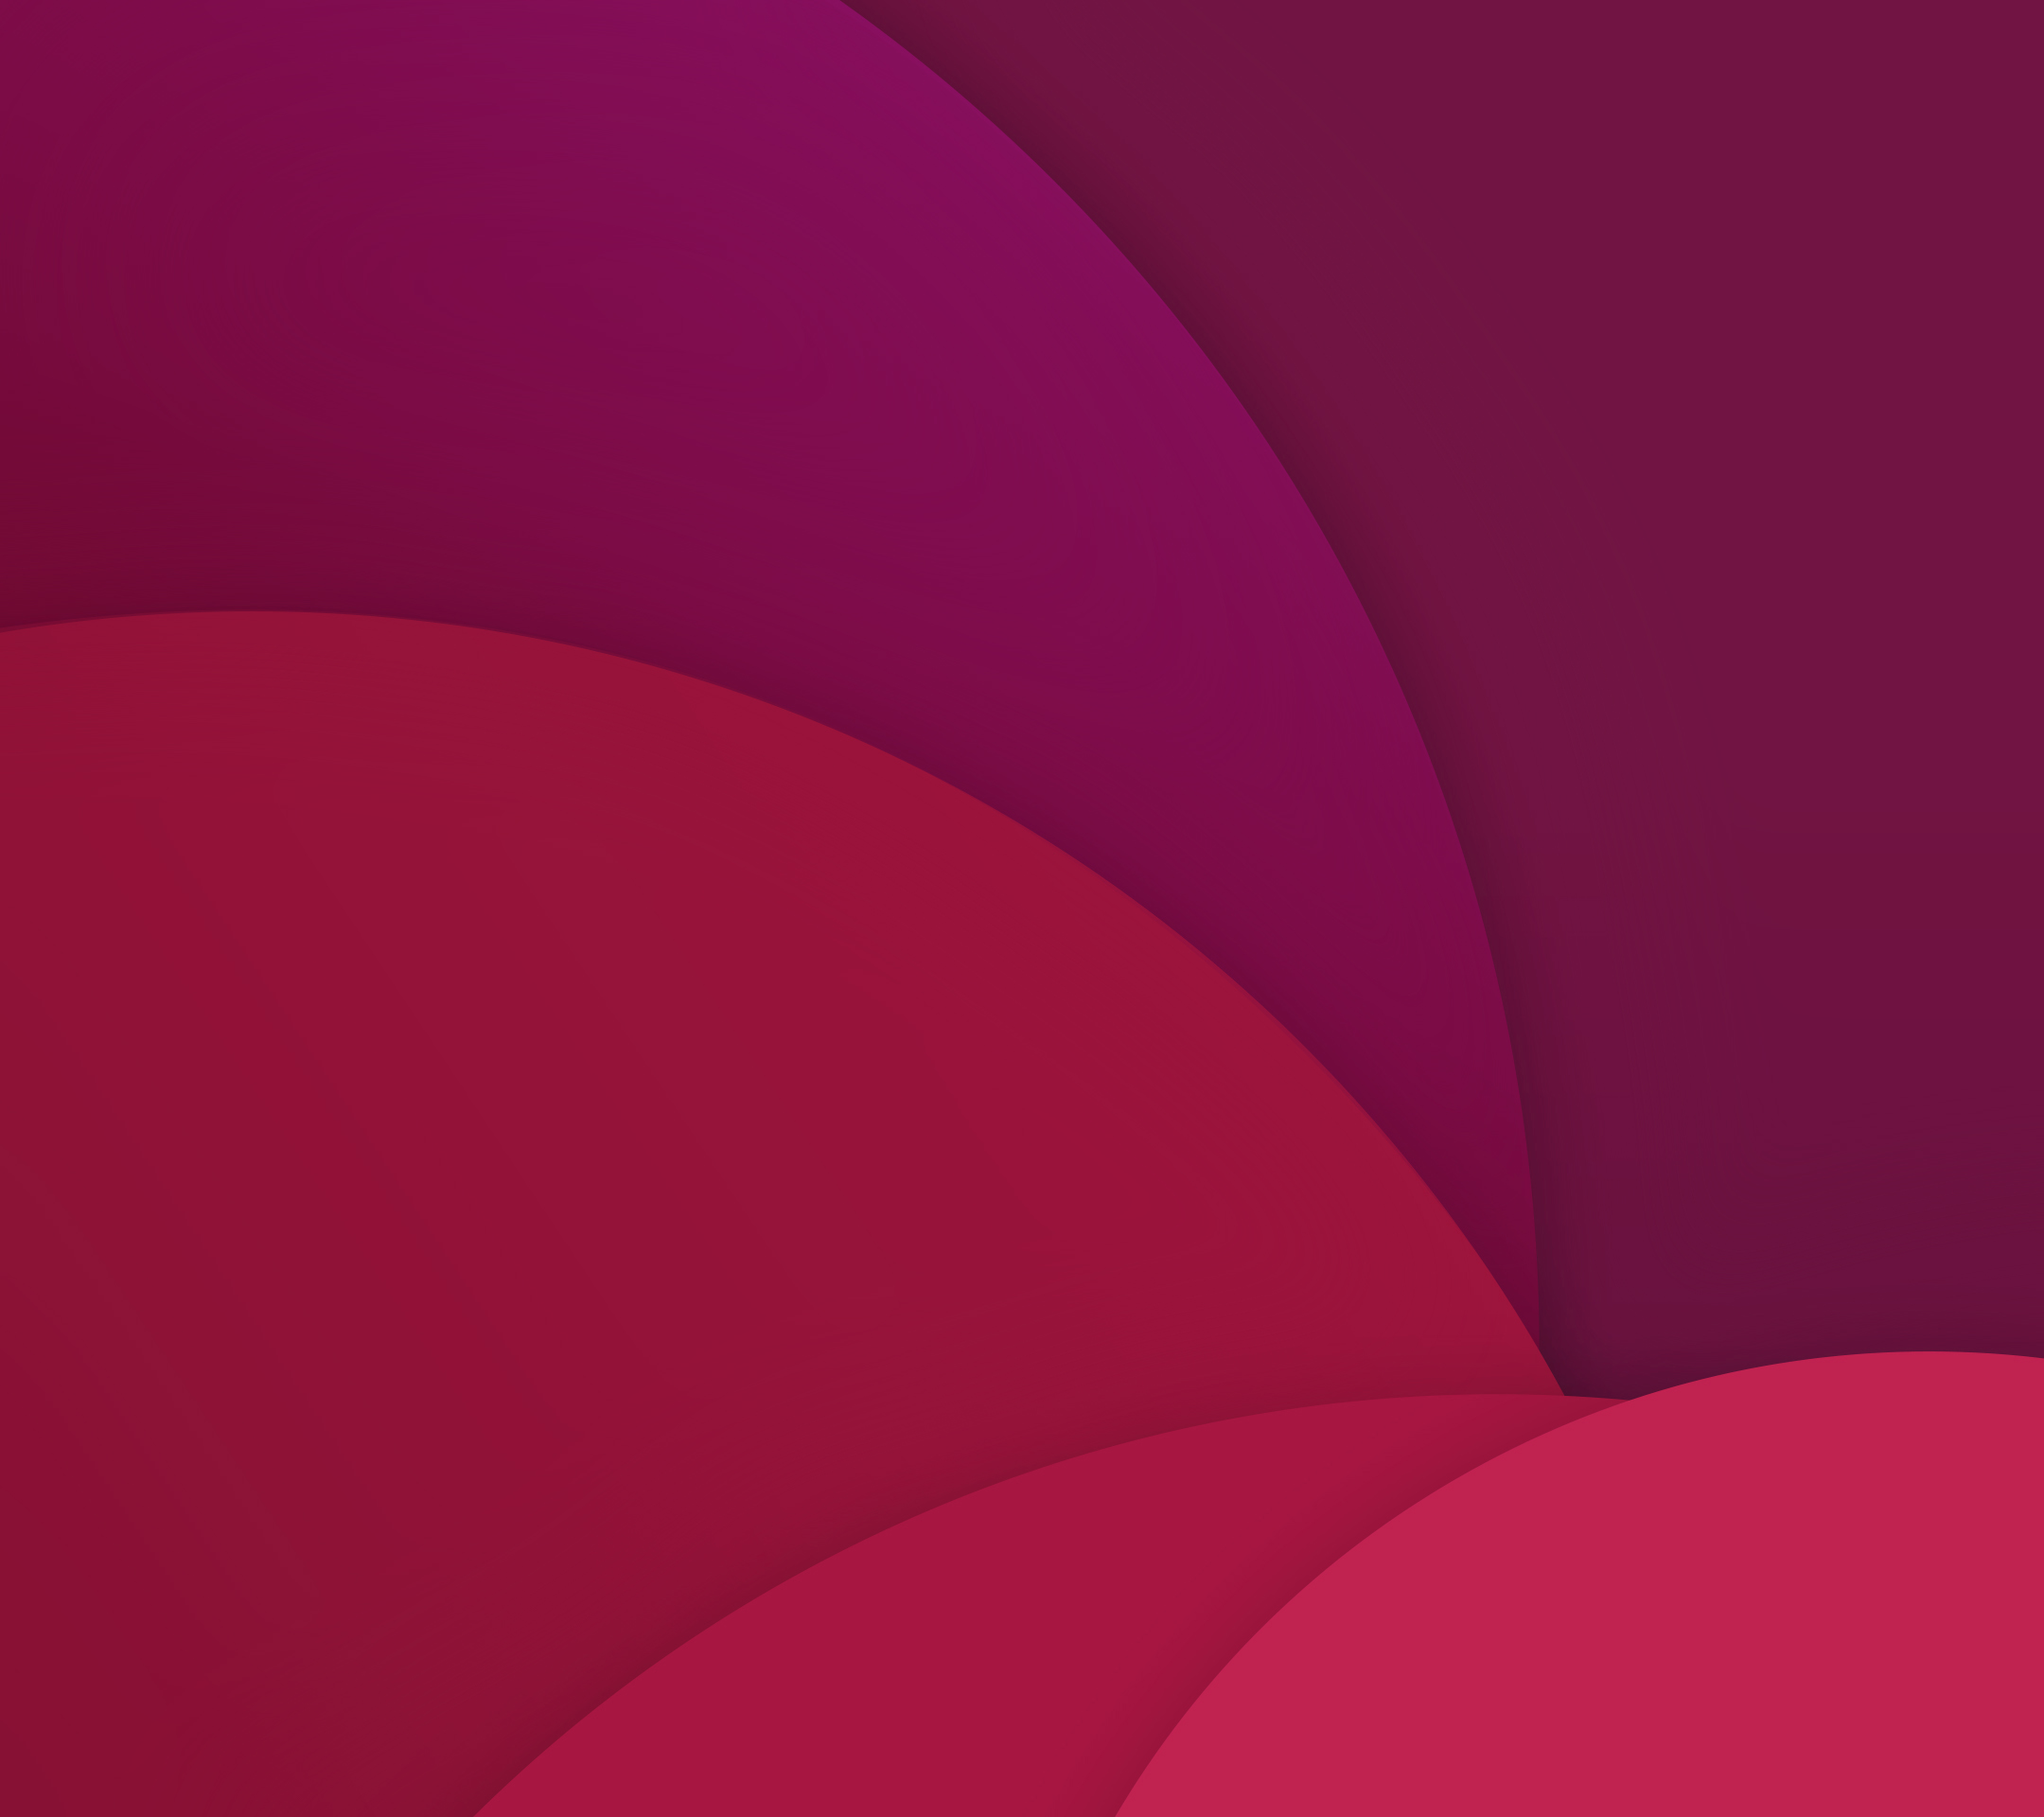 Download all LG G Flex 2 high-res wallpapers here